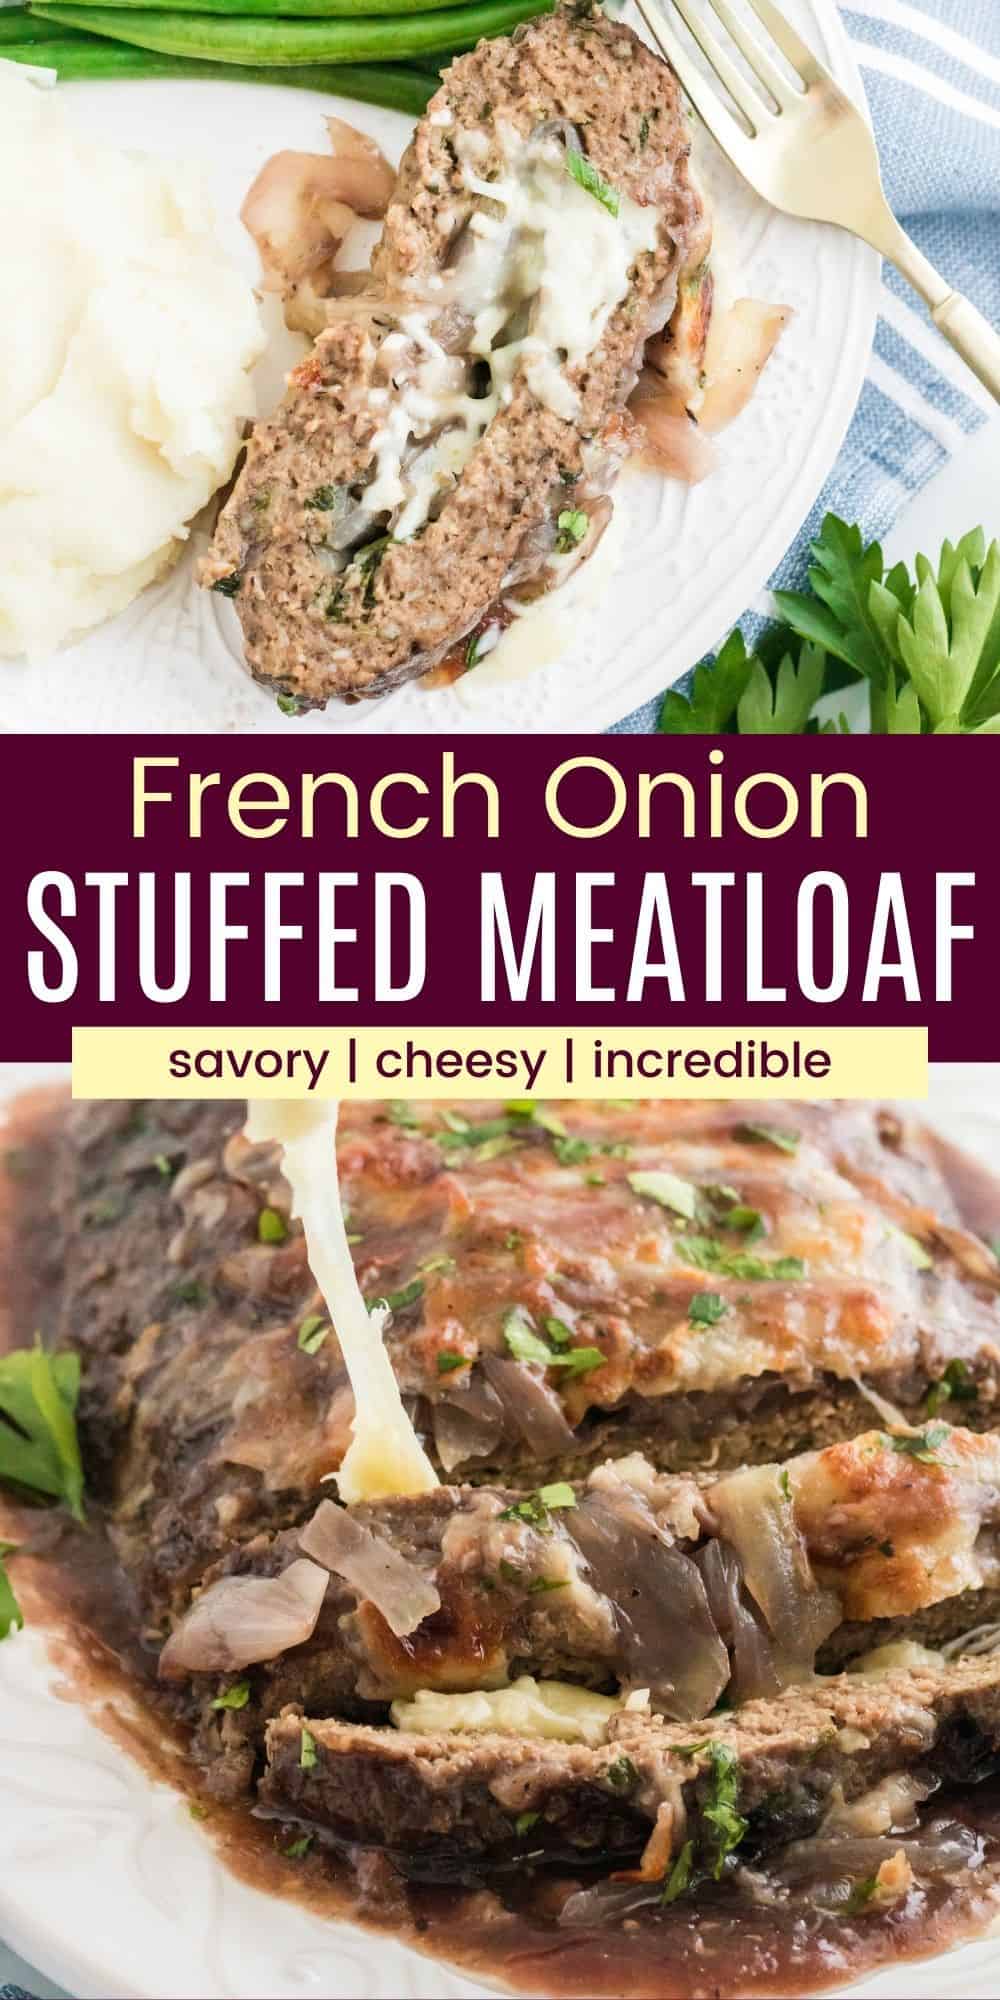 Hearty French Onion Stuffed Meatloaf | Cupcakes and Kale Chips